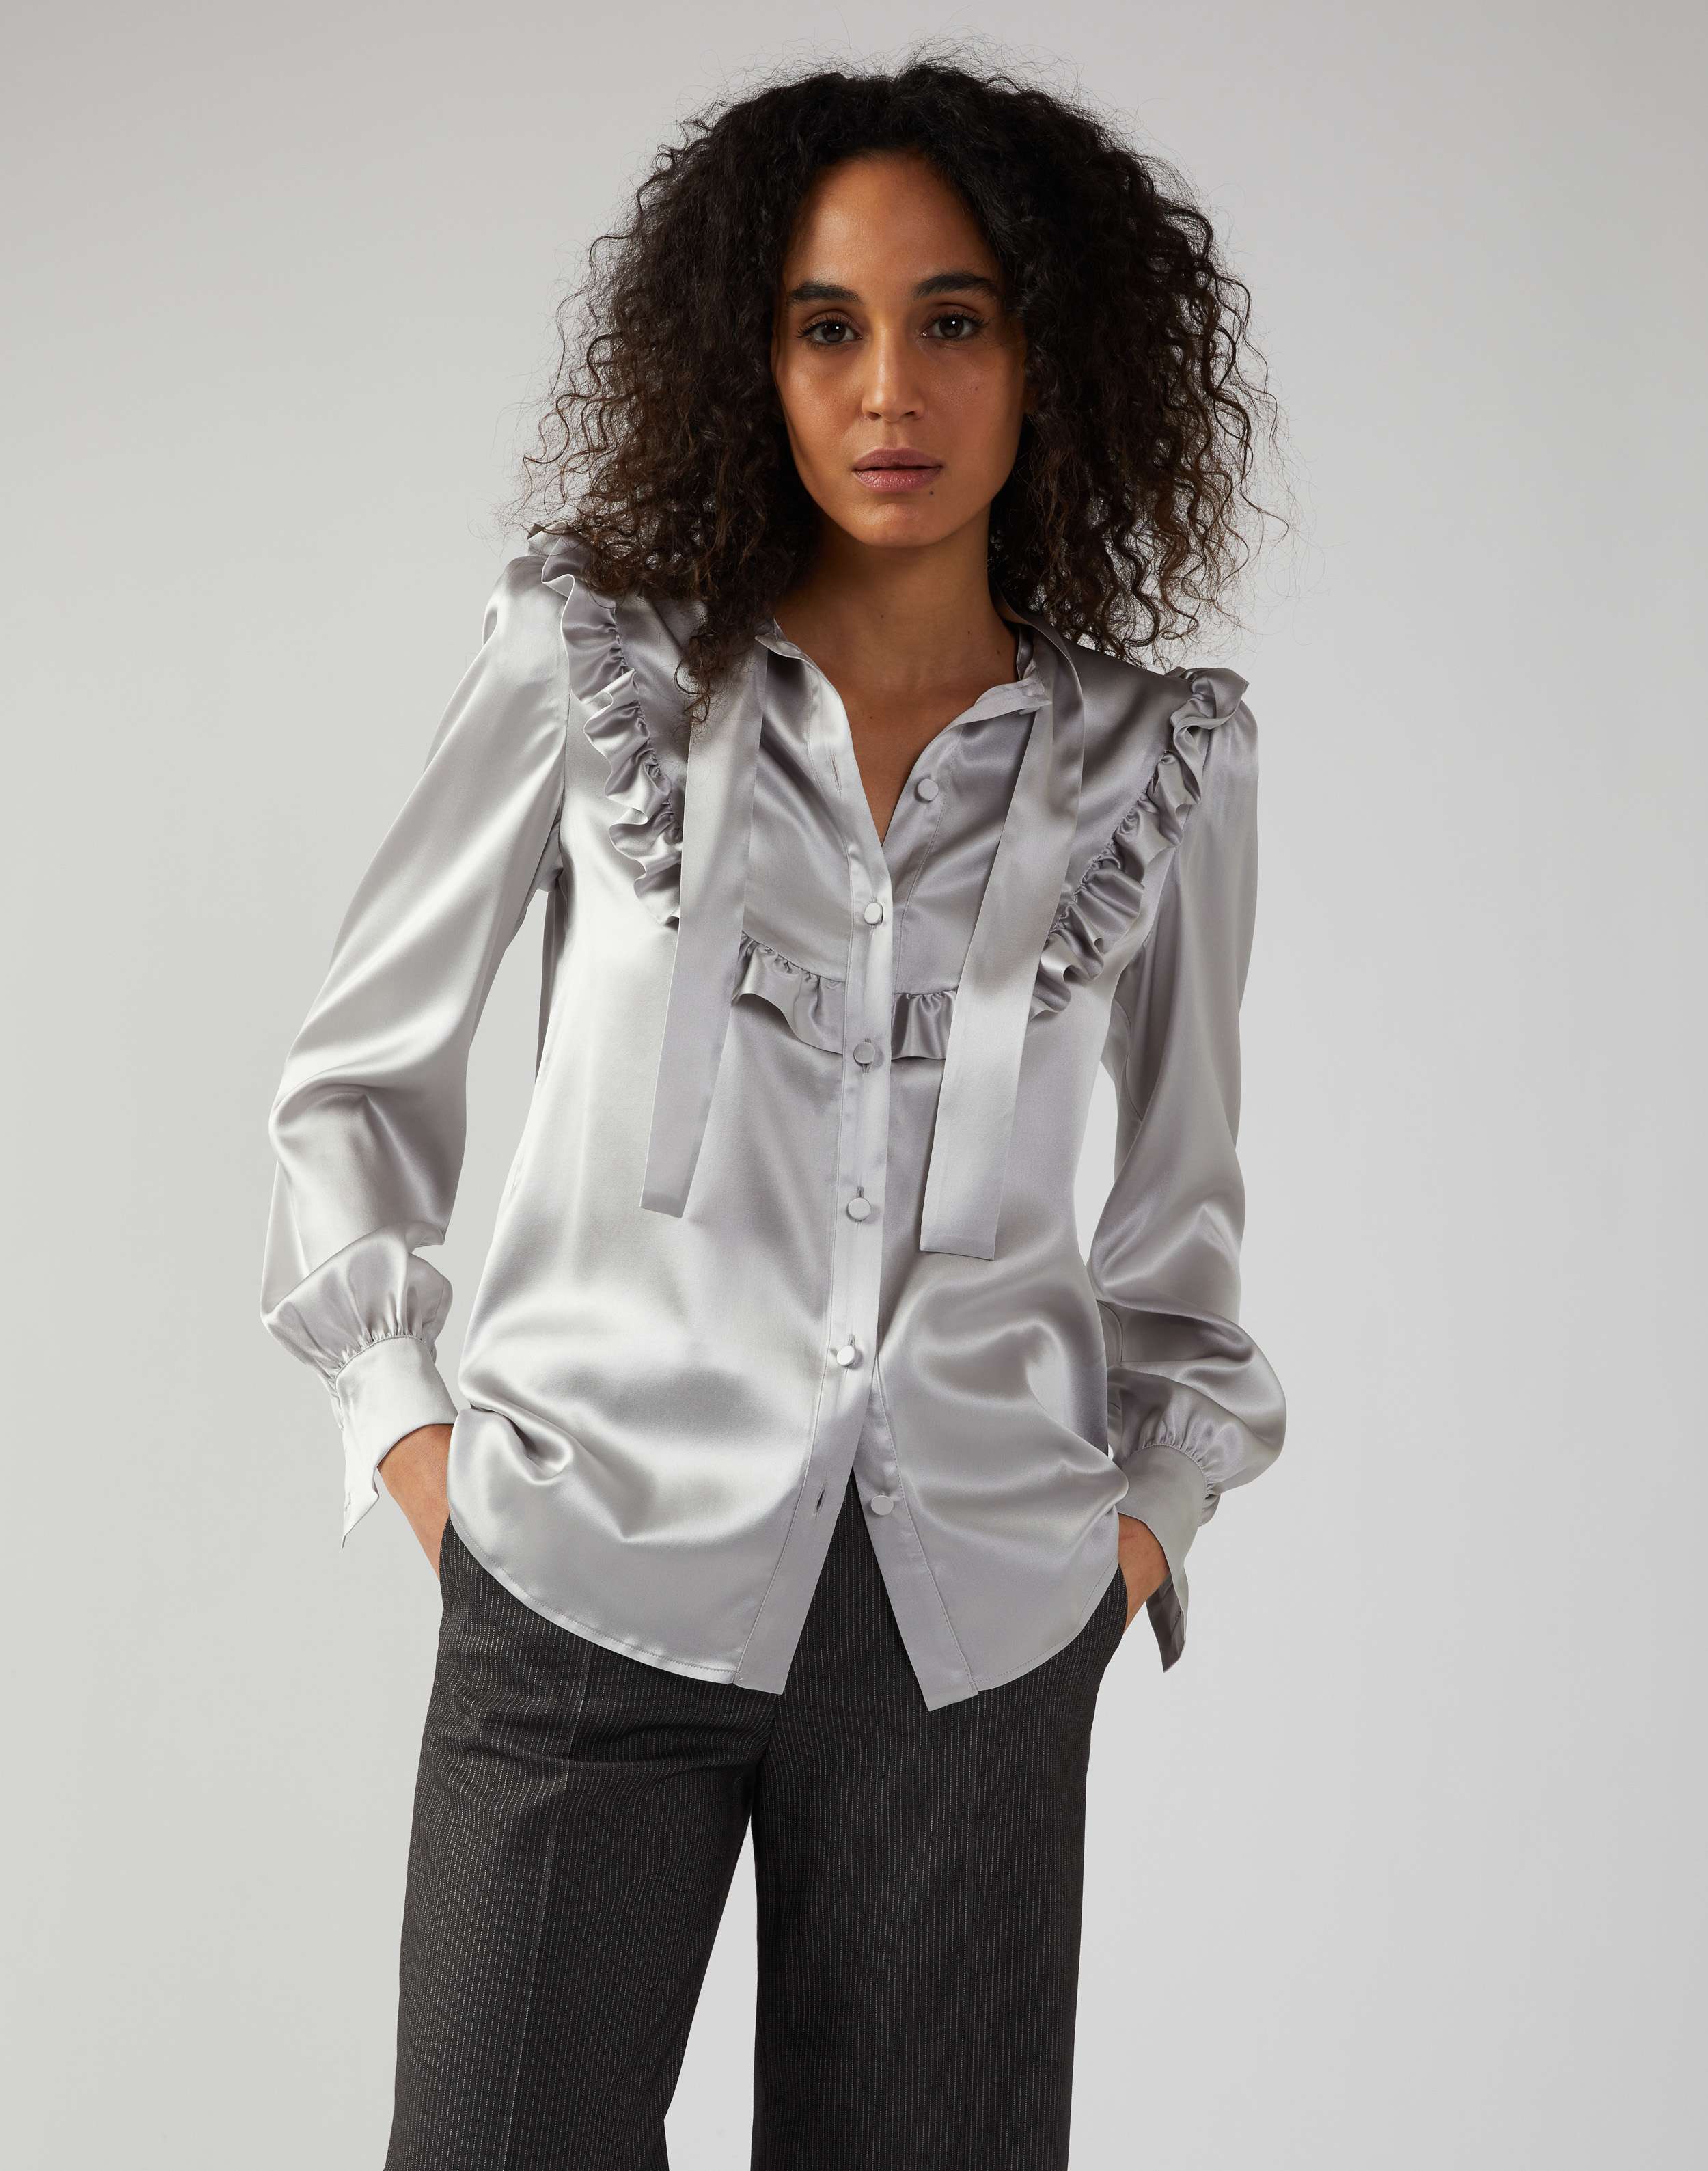 Grey shirt in silk with ruffles and bow detail